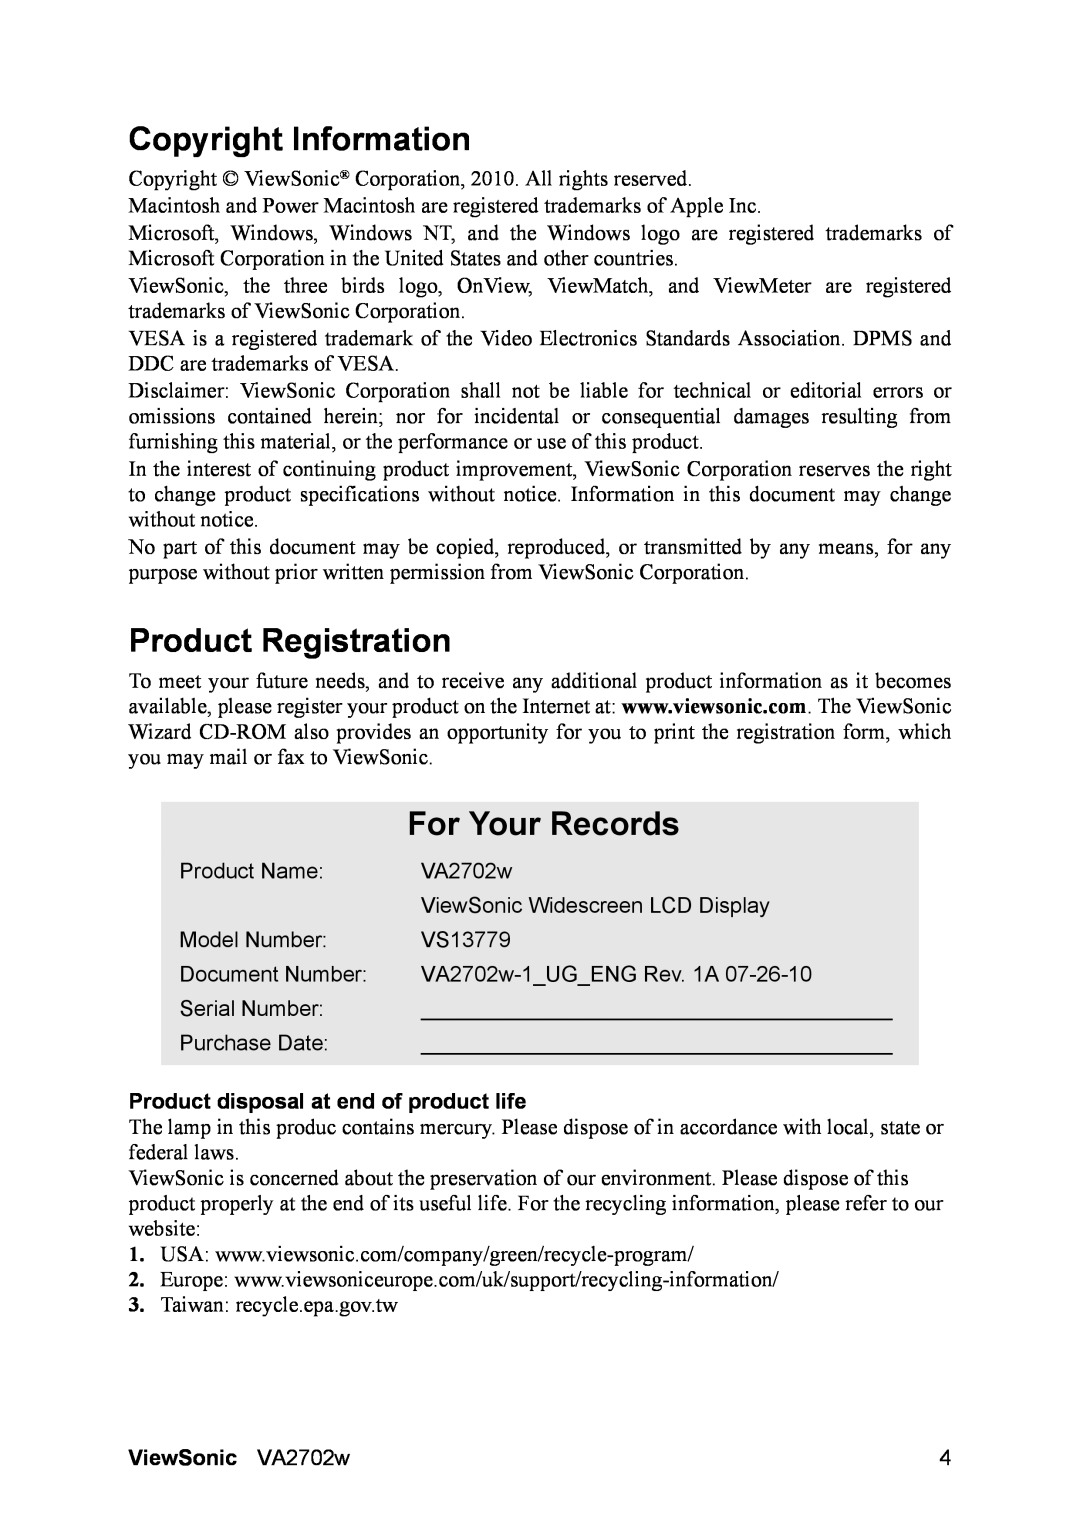 ViewSonic VA2702W Copyright Information, Product Registration, For Your Records, Product disposal at end of product life 